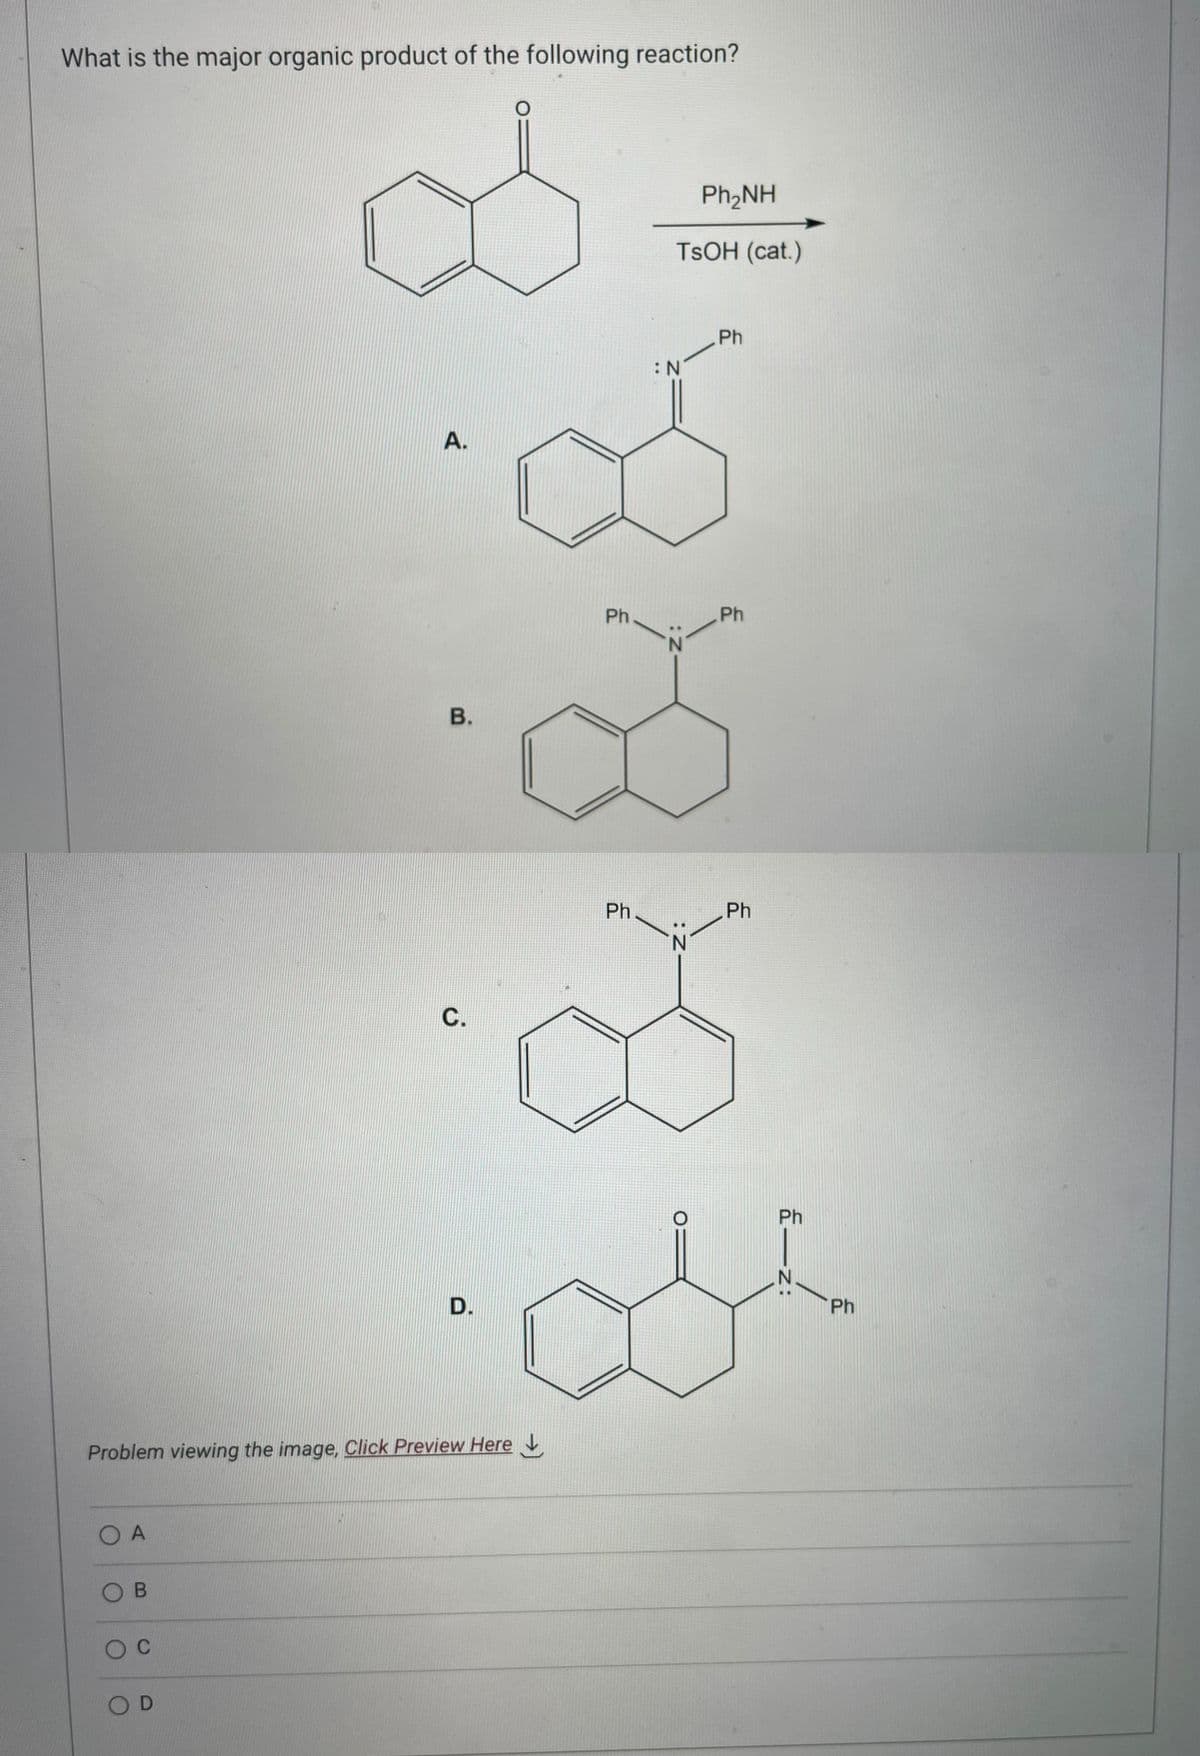 What is the major organic product of the following reaction?
Ο Α
OB
O C
A.
Problem viewing the image. Click Preview Here
OD
B.
C.
D.
Ph
Ph
Ph,NH
TSOH (cat.)
:N
Z:
N
: Z
Ph
Ph
Ph
Ph
Ph